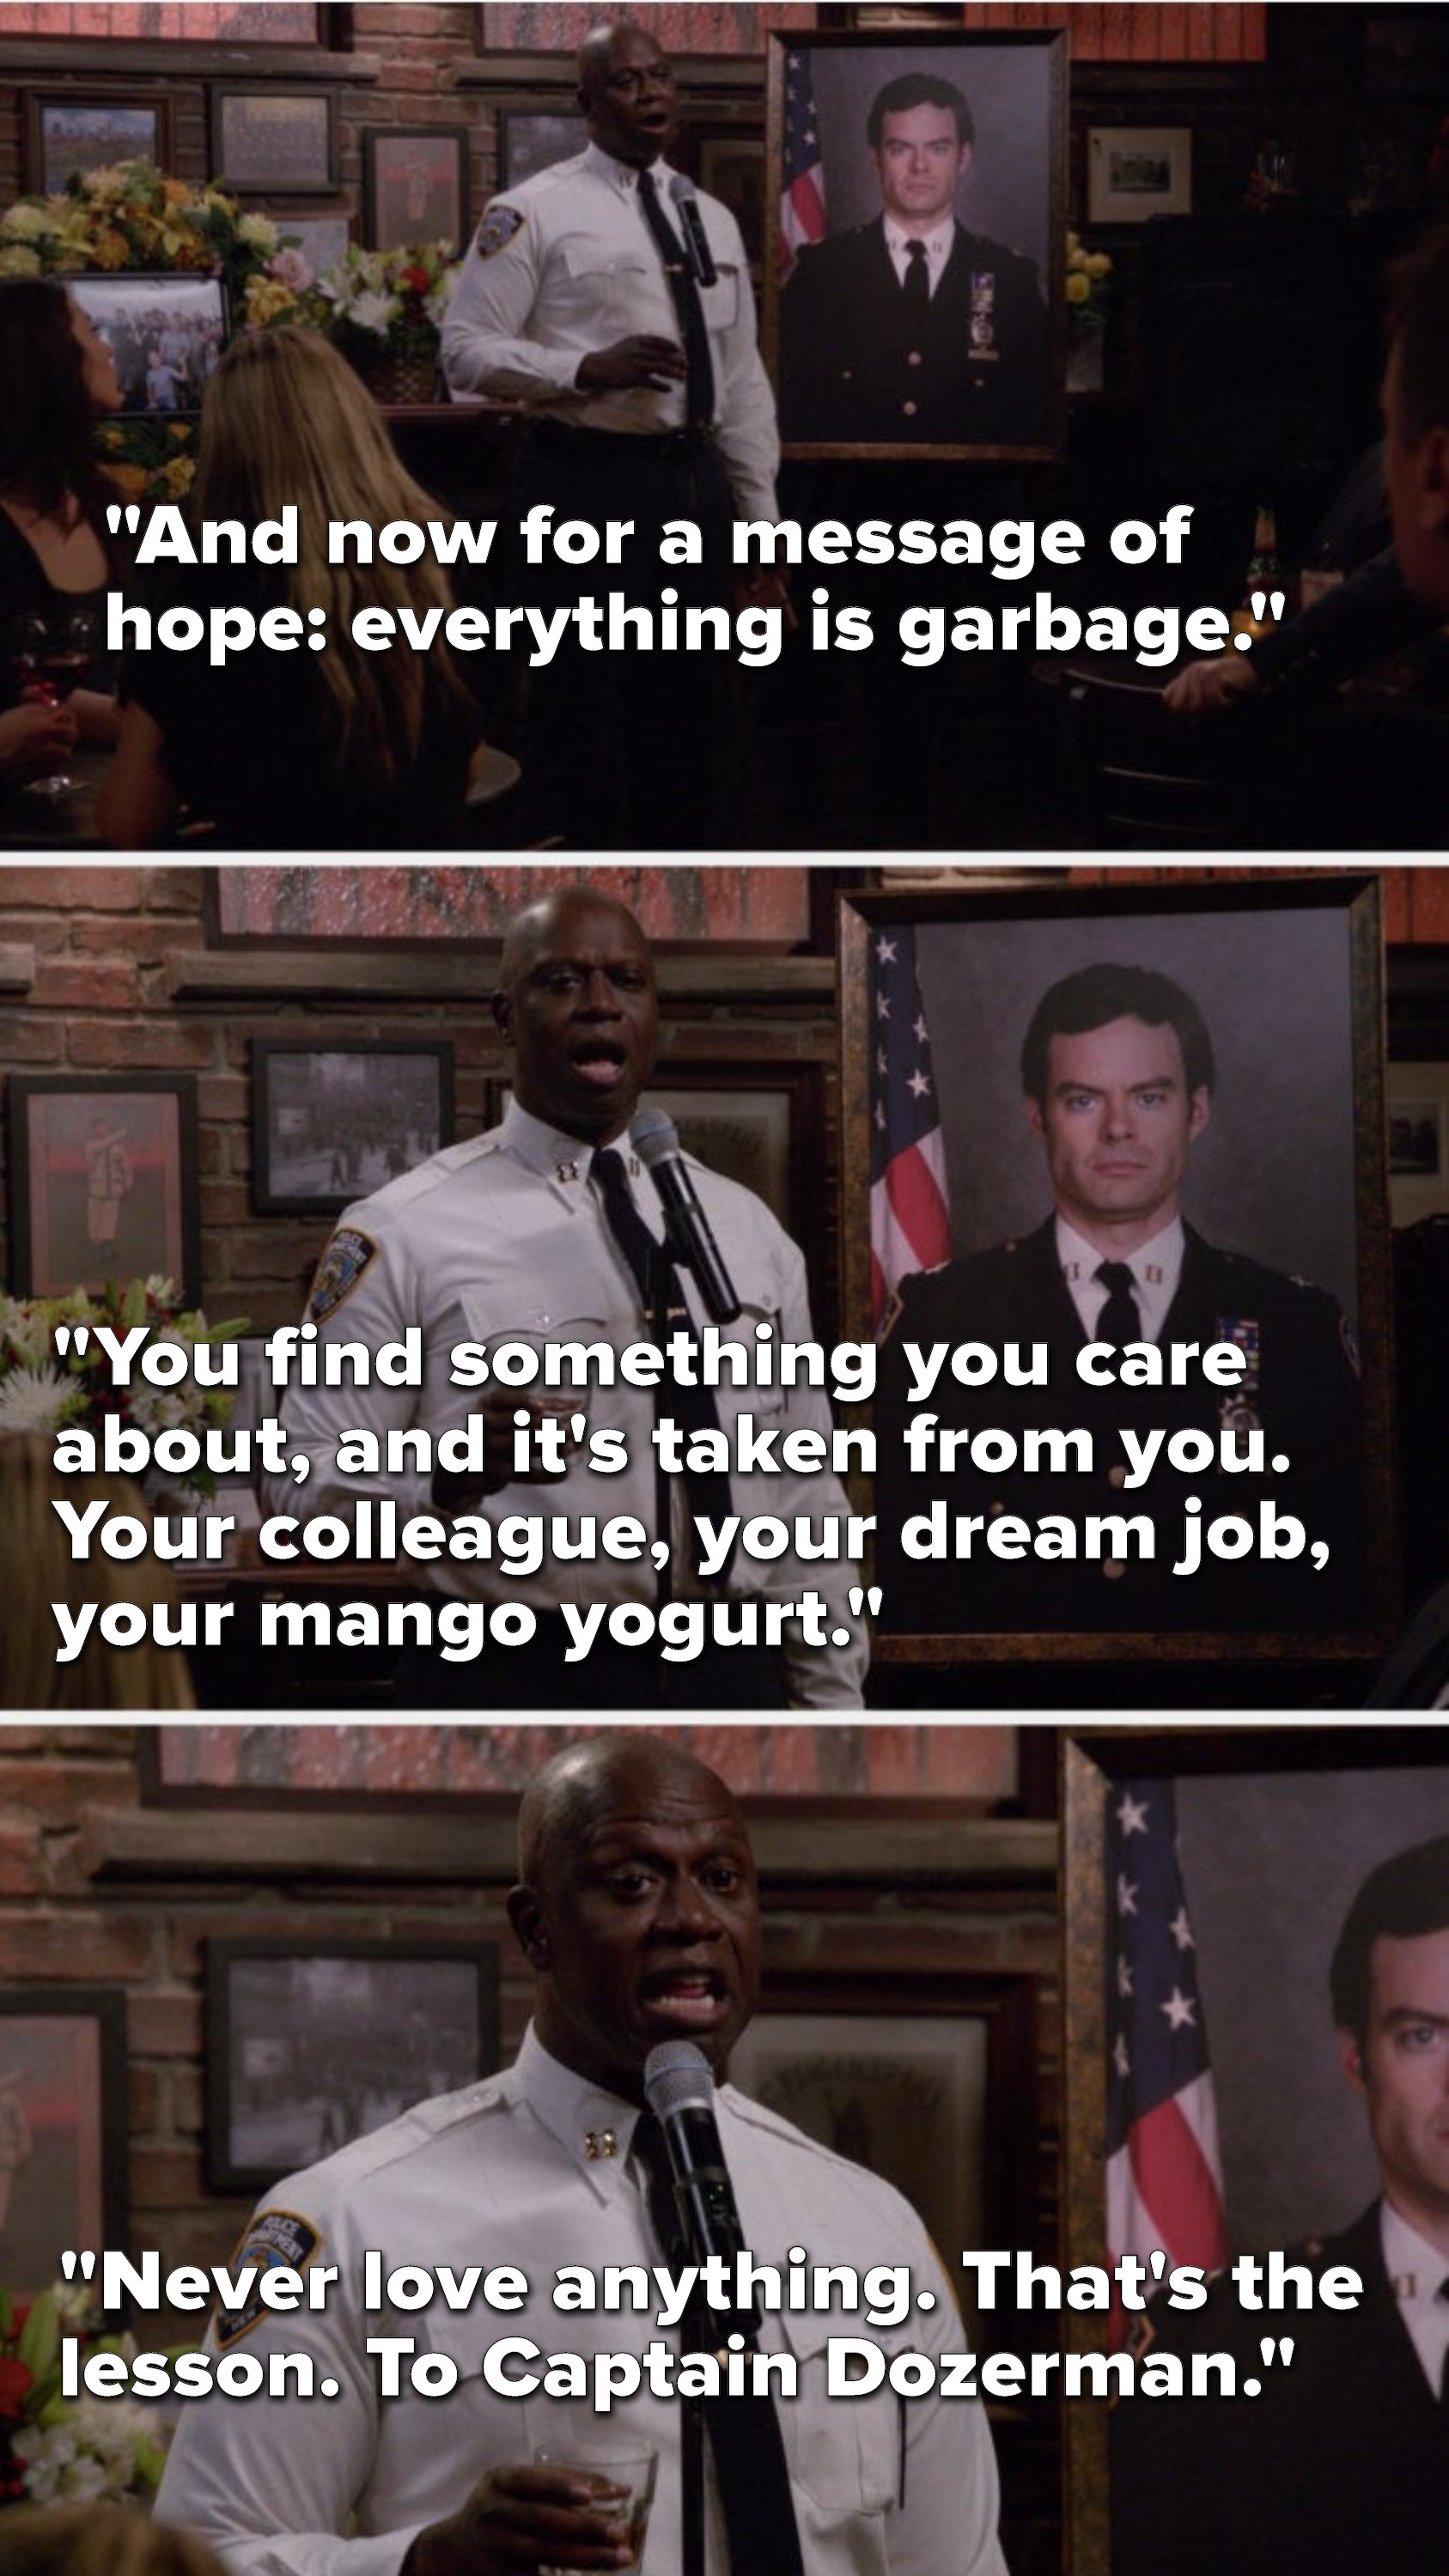 On Brooklyn Nine Nine, Holt says, For a message of hope, everything is garbage, you find something you care about, and it is taken from you, your colleague, your dream job, your mango yogurt, never love anything, that is the lesson, to Captain Dozerman